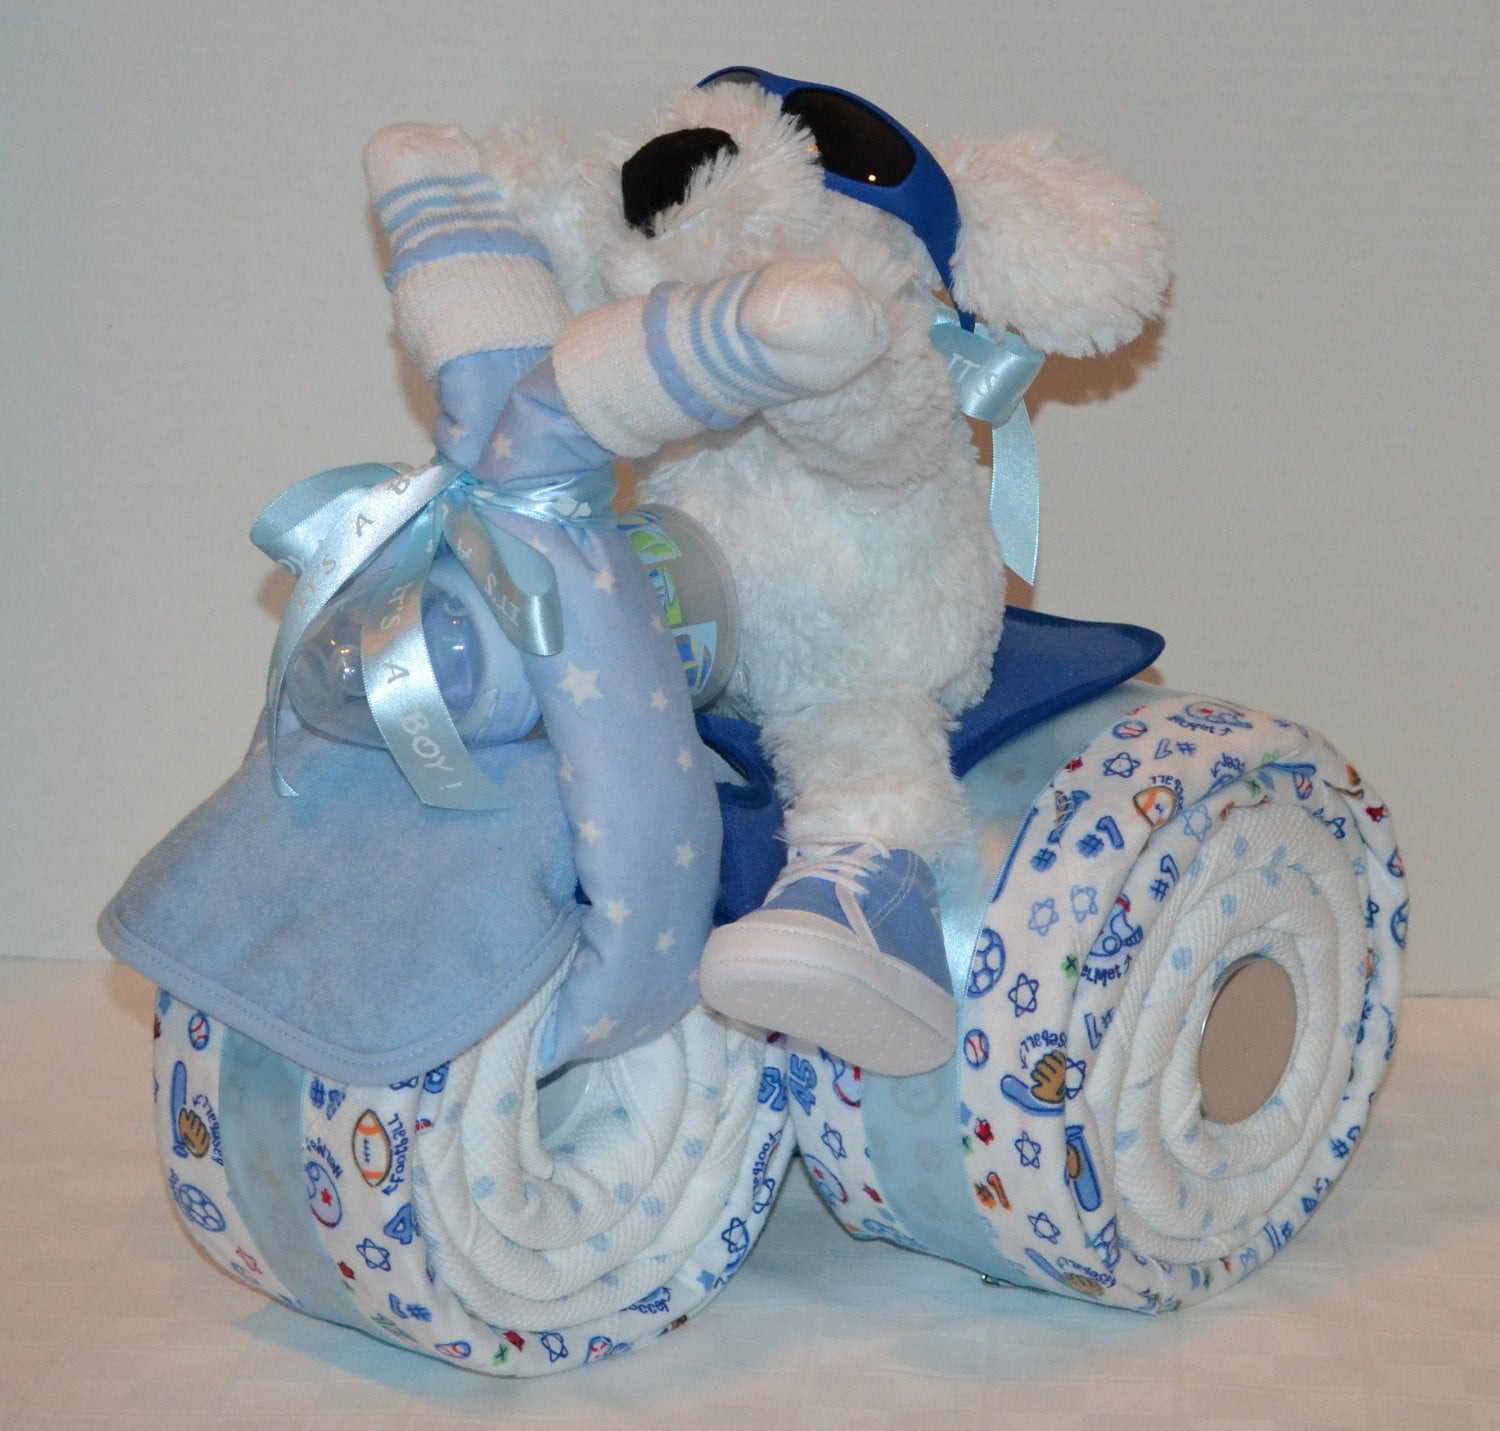 Gifts For Baby Shower Boy
 Tricycle Trike Diaper Cake Baby Shower Gift Sports theme